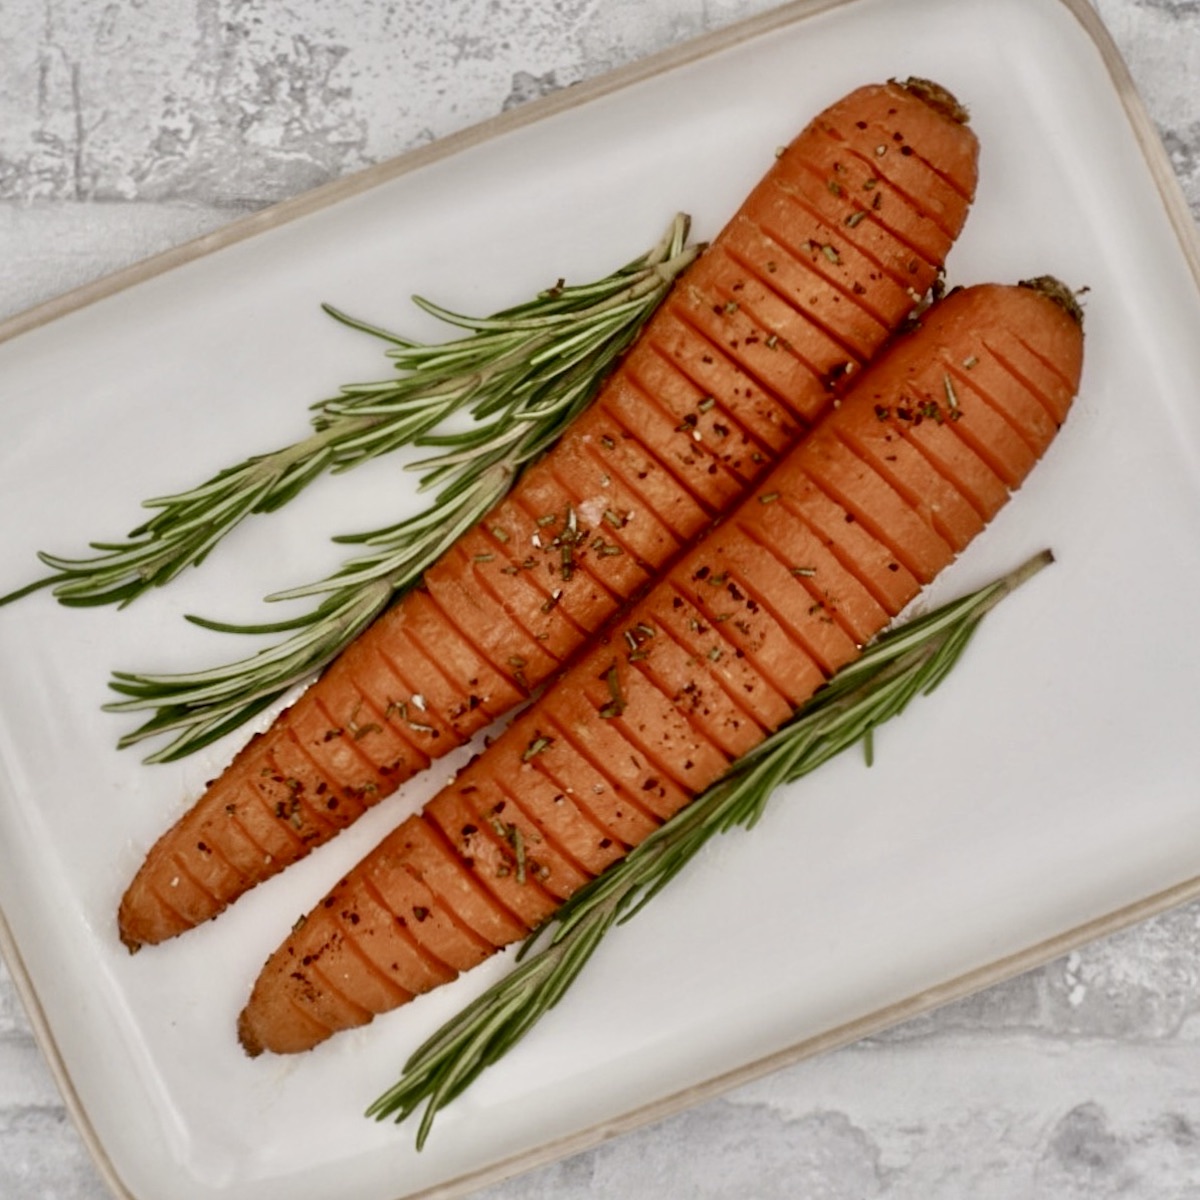 Two hasselback carrots on a serving plate with rosemary garnish